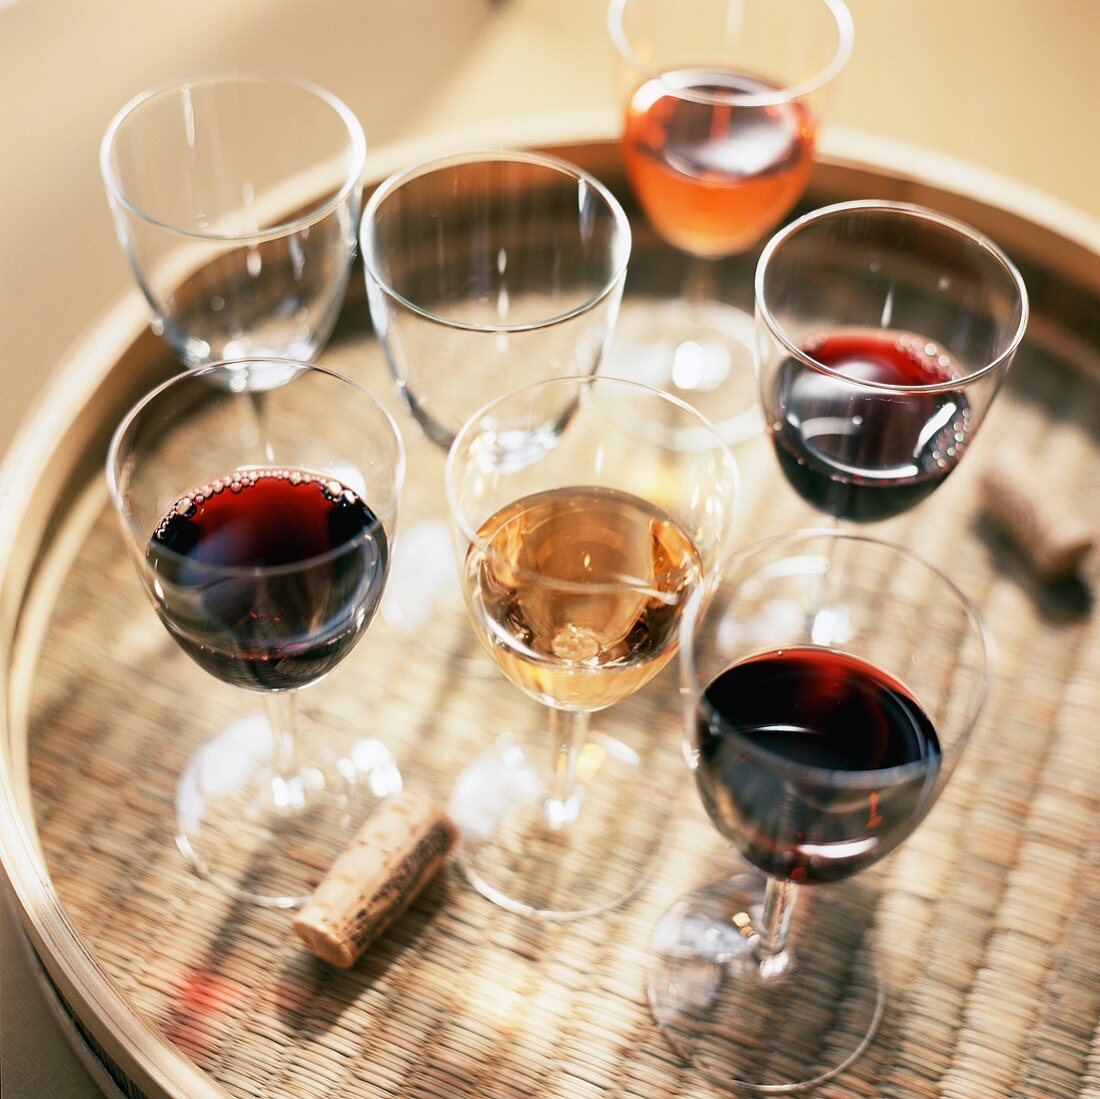 Assorted Glasses of Wine on a Woven Tray; Cork